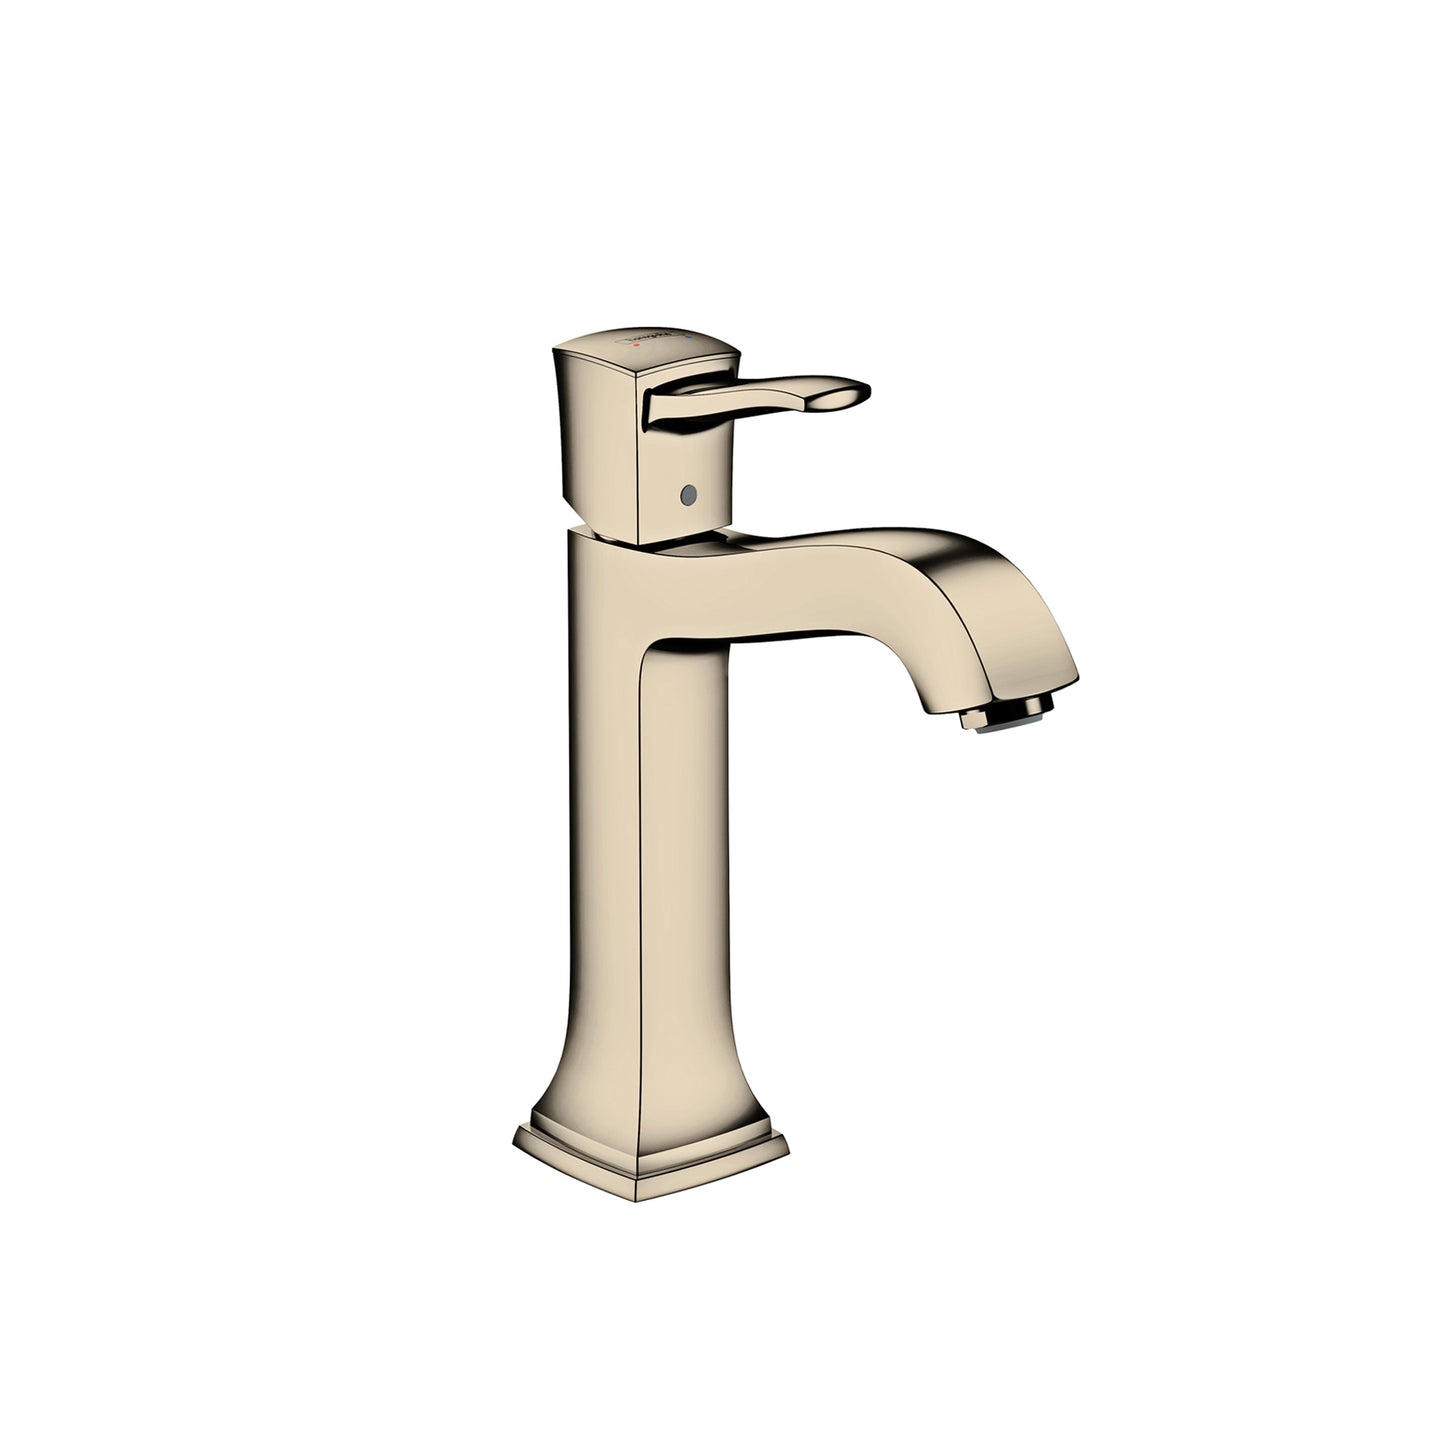 HANSGROHE 31302831 Polished Nickel Metropol Classic Classic Single Hole Bathroom Faucet 1.2 GPM